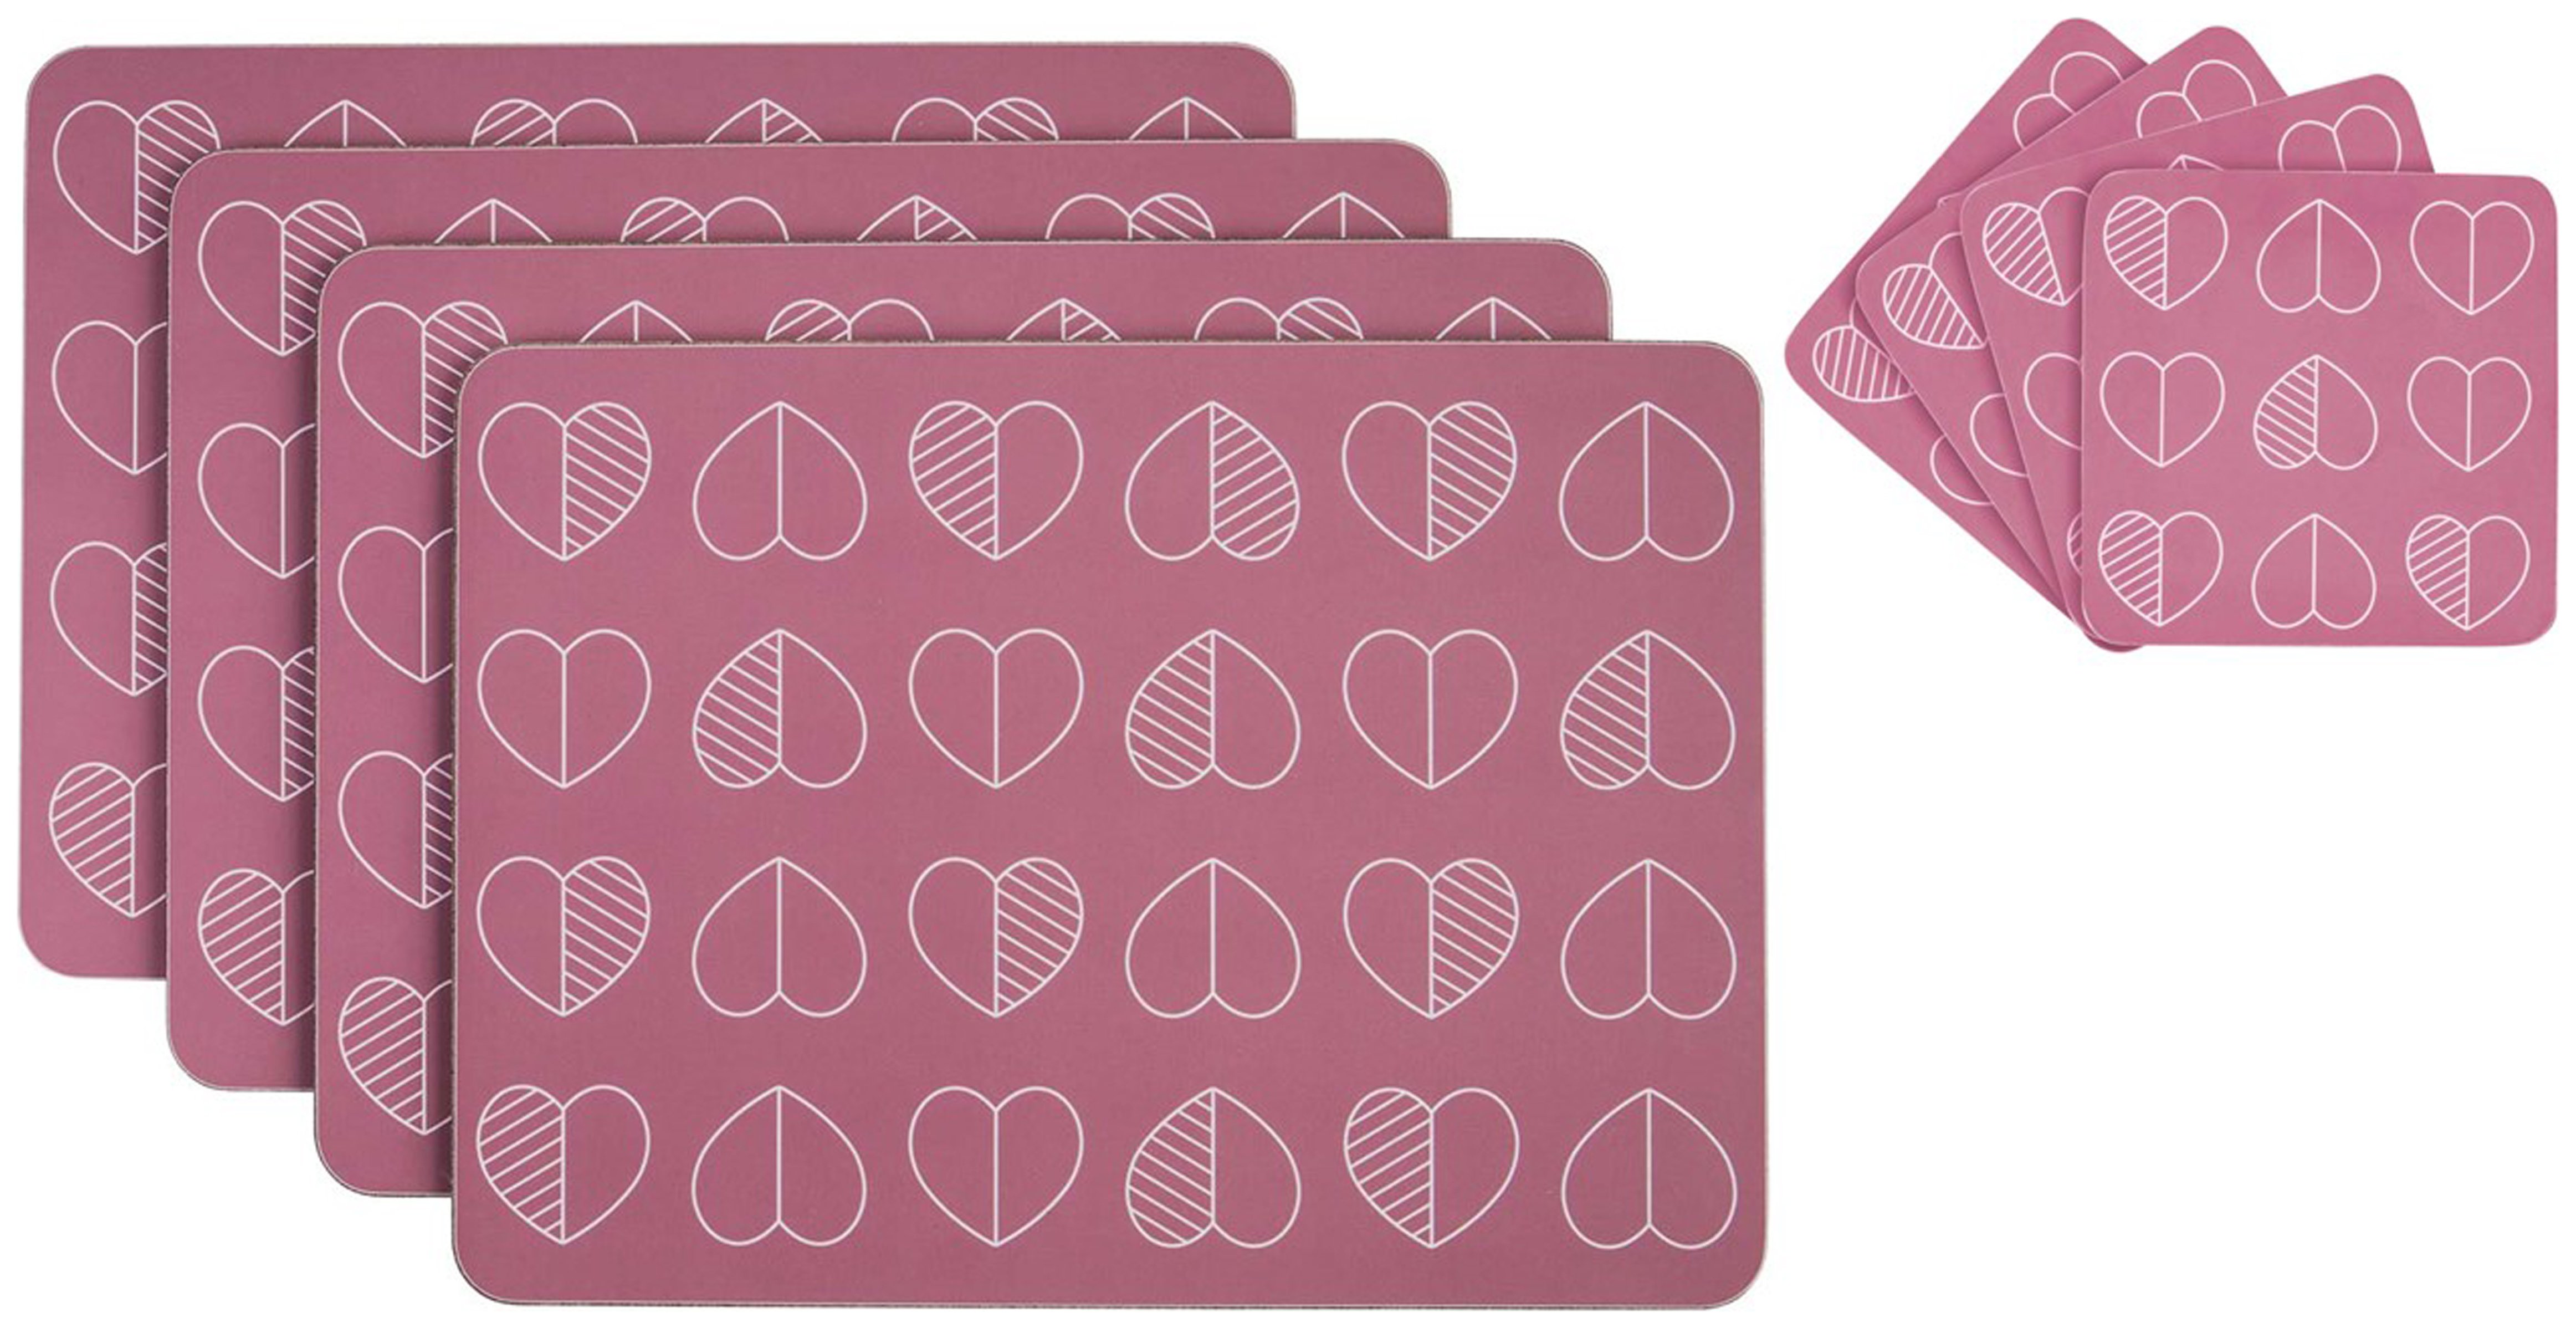 Beau and Elliot Set of 4 Placemats and Coasters - Pink